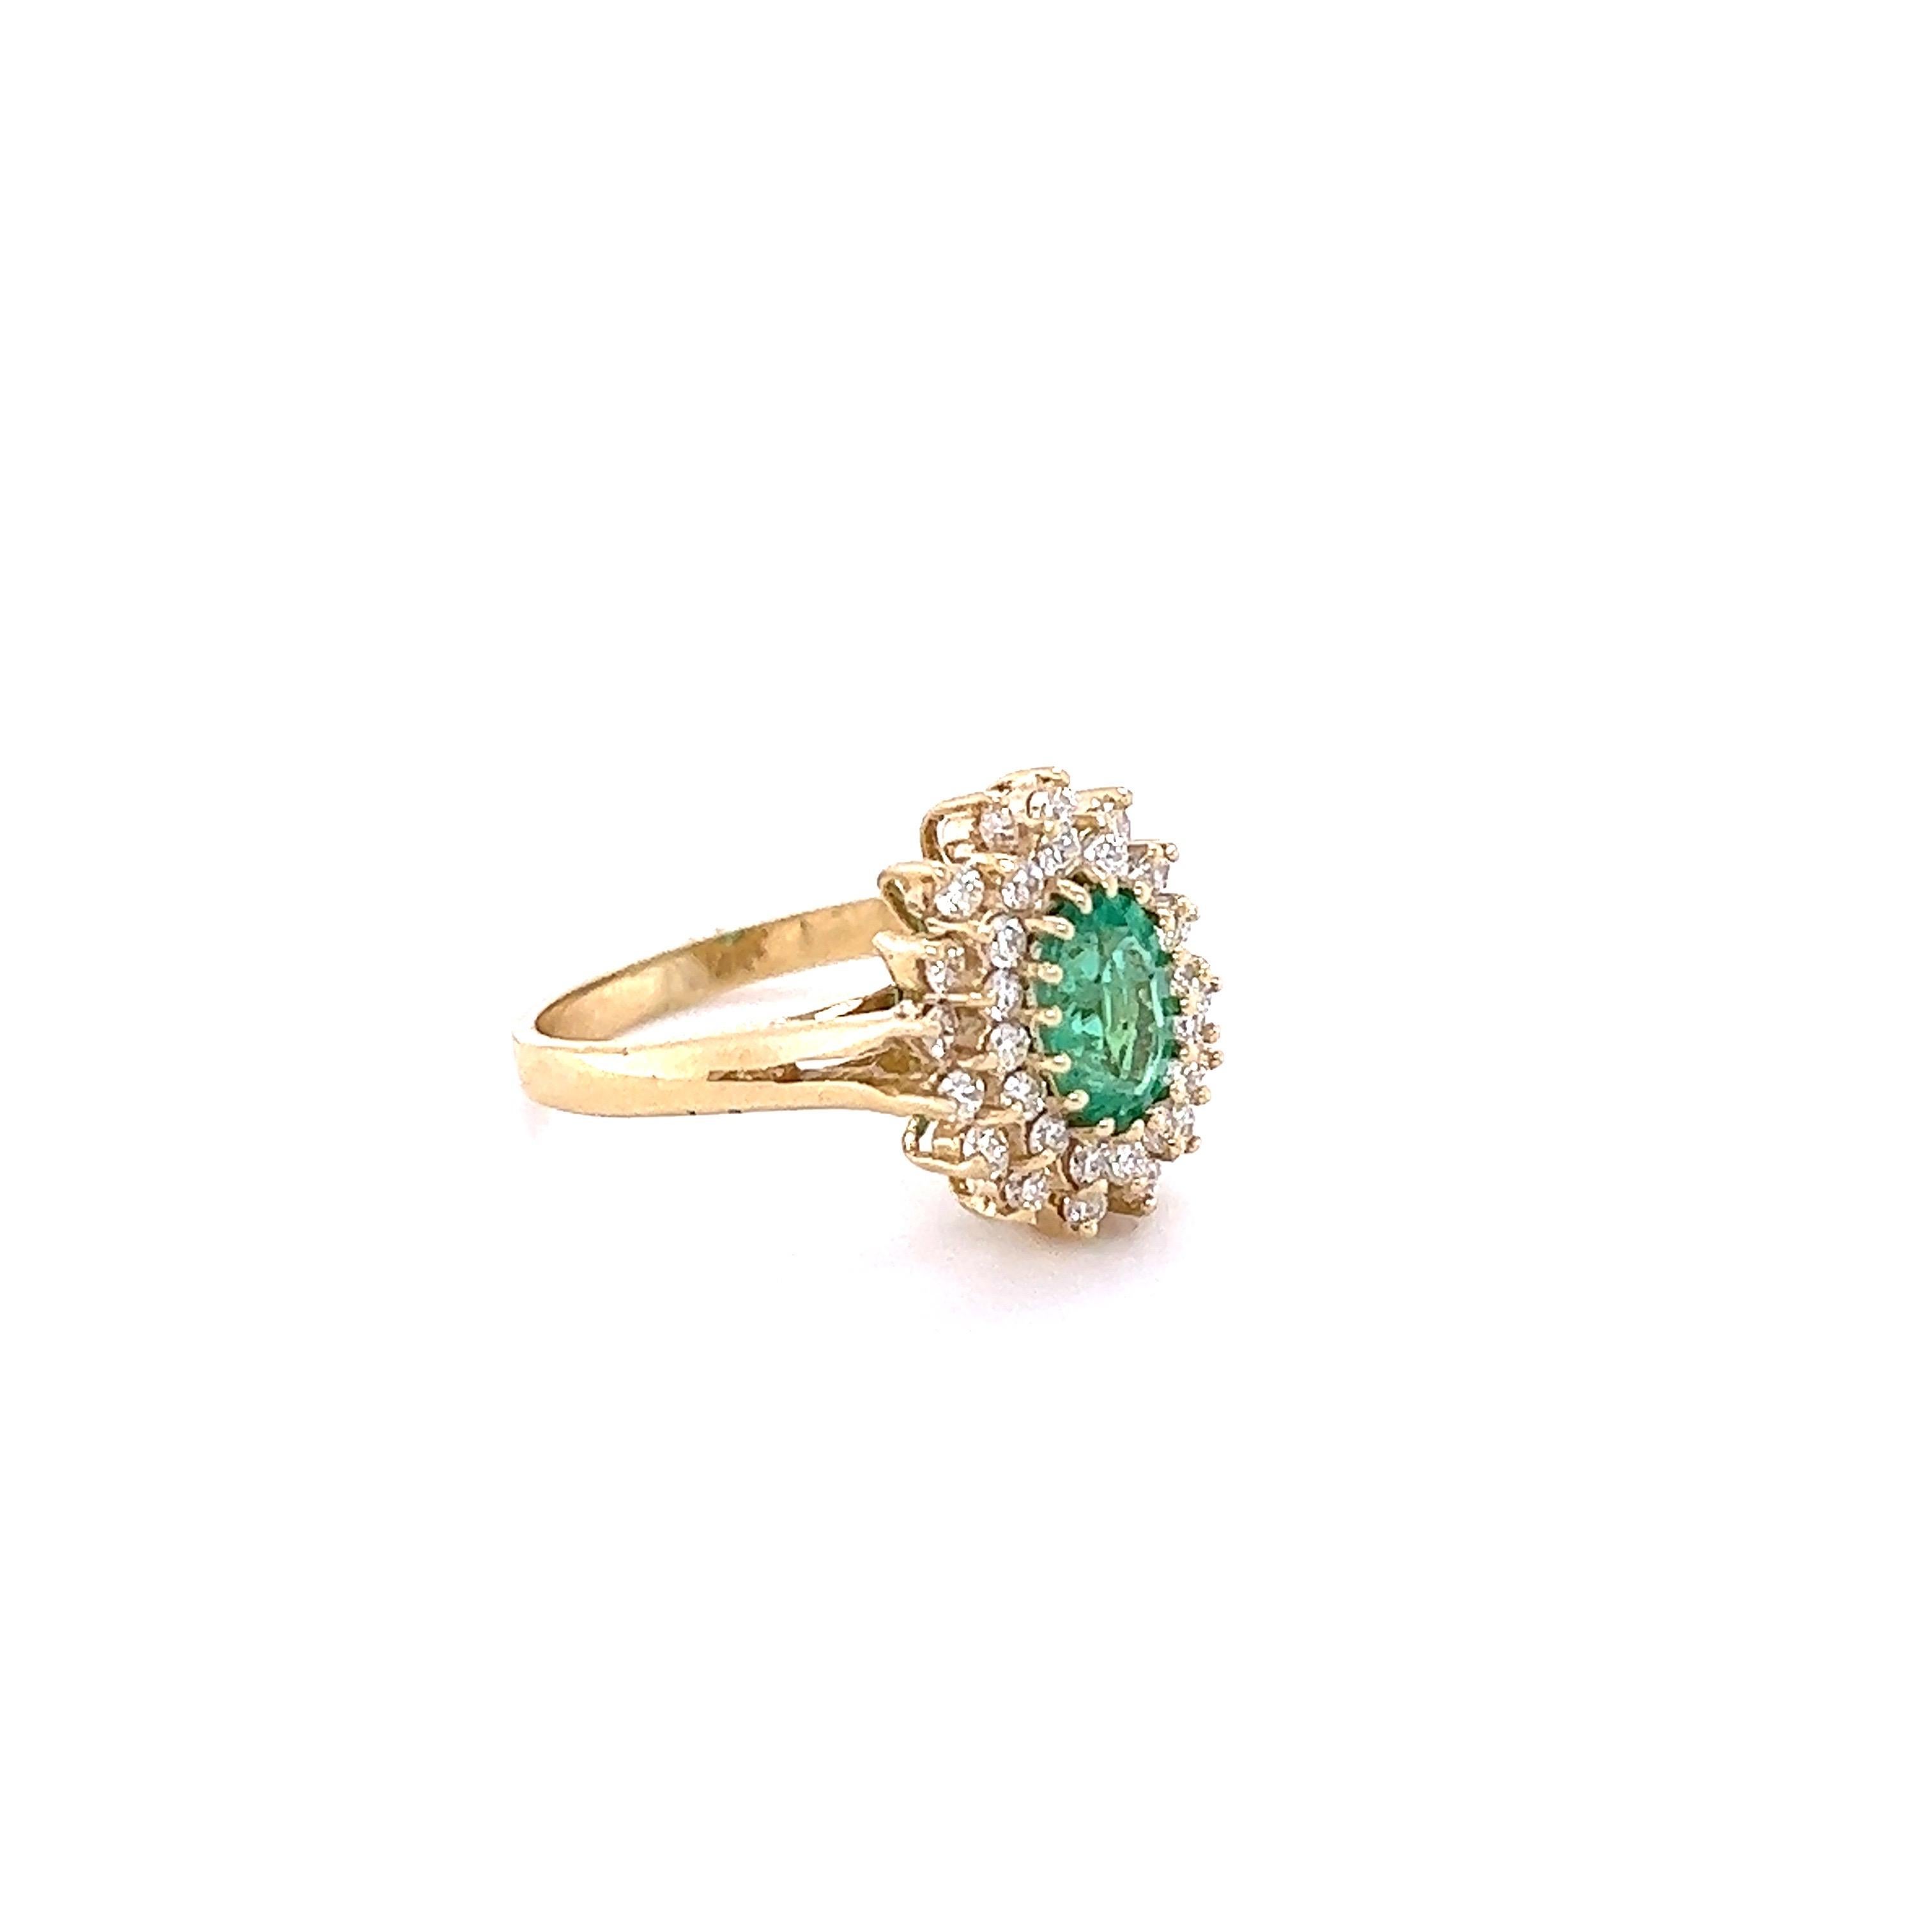 This ring has a 0.82 Carat Emerald that measures at approximately 8 mm x 5 mm. There are 32 Round Cut Natural Diamonds that weigh 0.51 carats. Clarity and Color: VS-H. 

Set in 14 Karat Yellow Gold and has an approximate weight of 3.6 grams. 

The